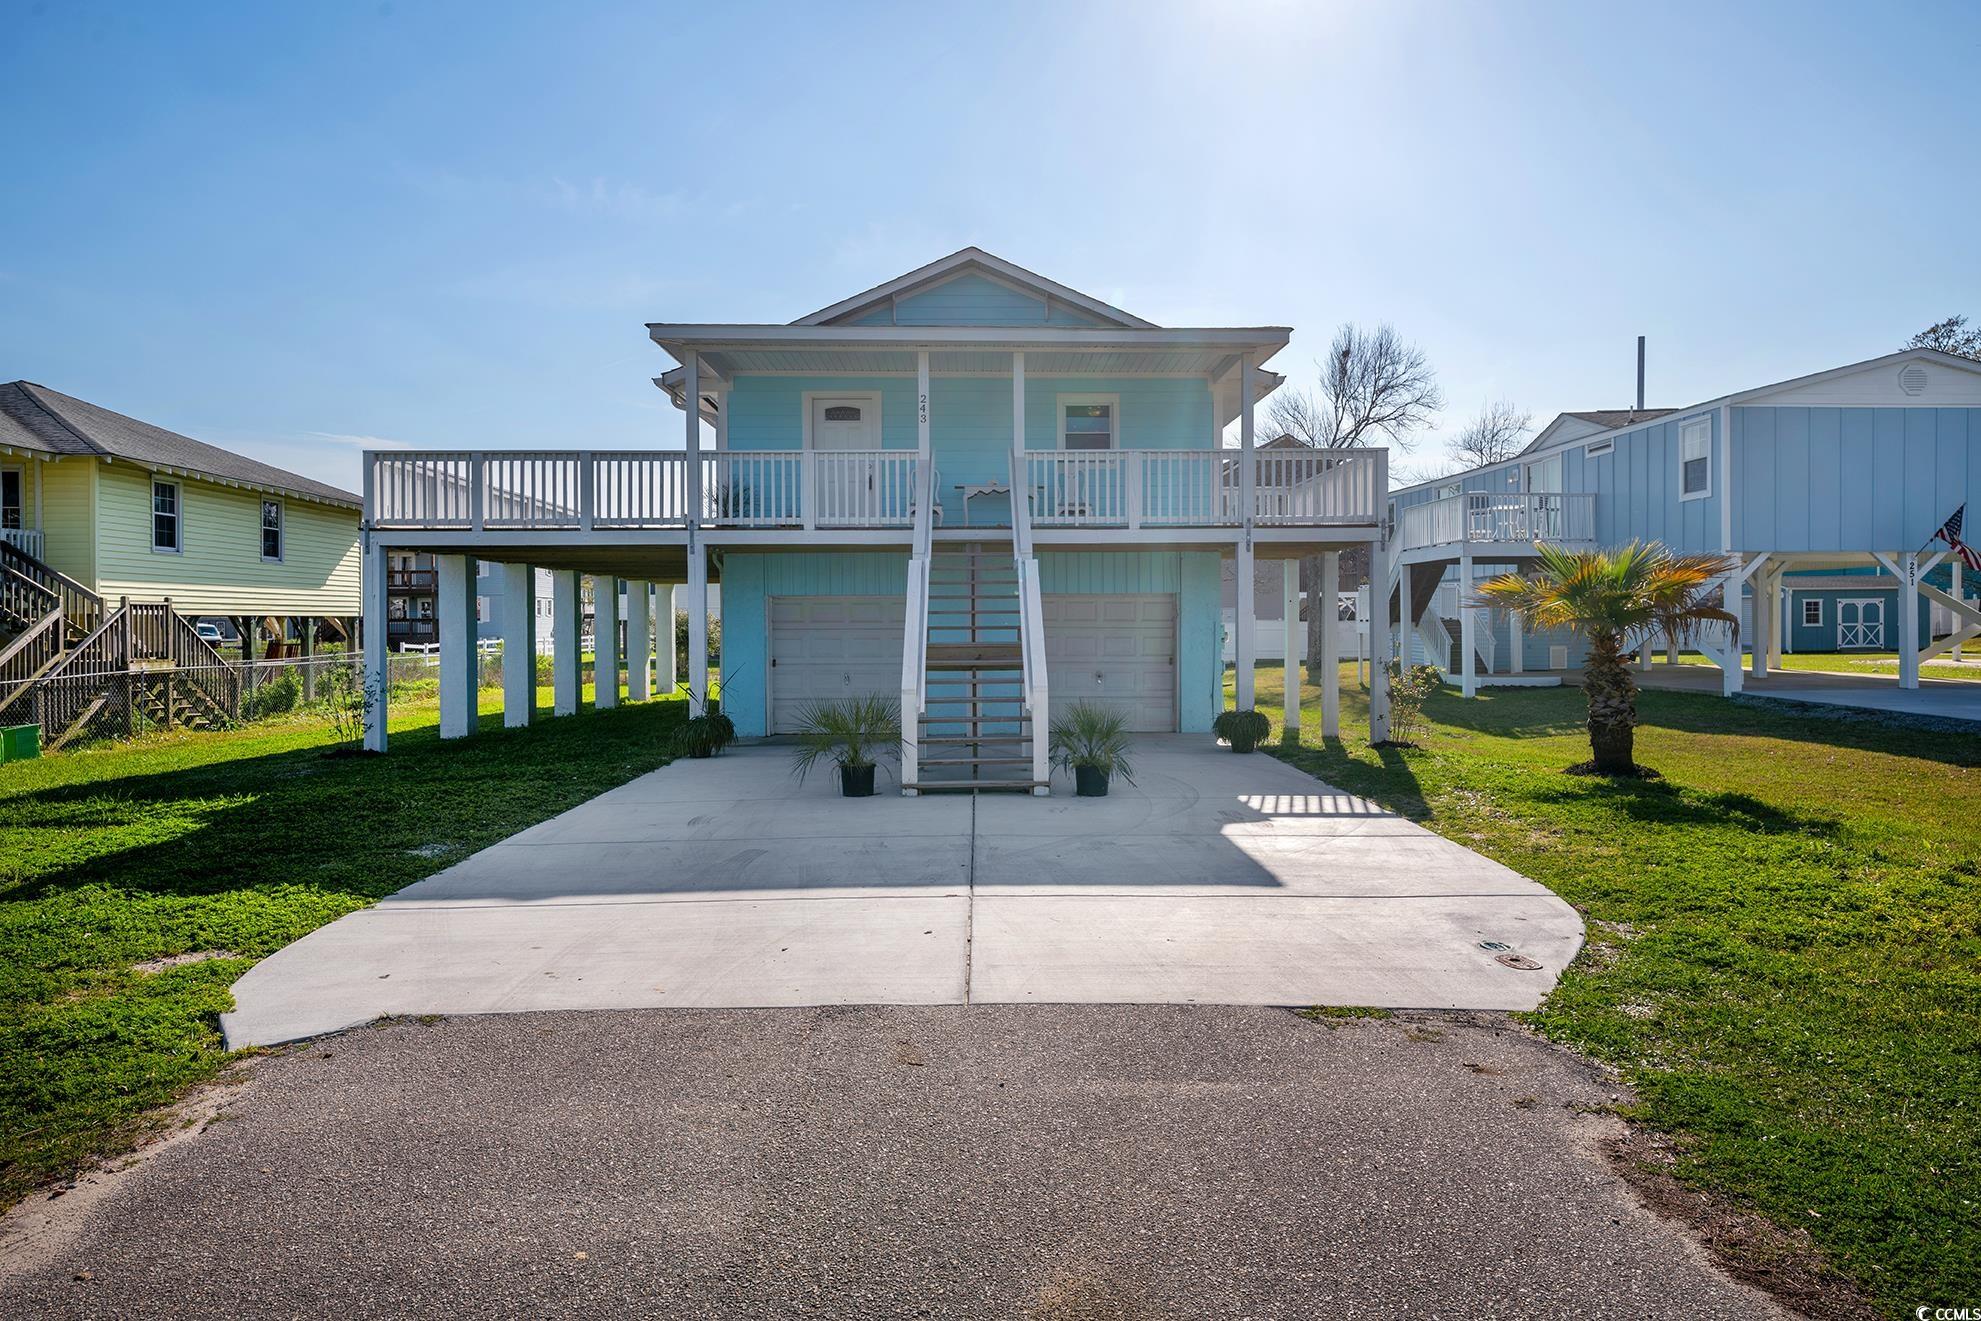 beach lovers and investors! this fully remodeled raised beach home in the heart of garden city is the opportunity for you.  just a quick walk to the beach or golf cart to the pier!  the new expansive deck allows for ample outside living and fun in the sun.  no hoa makes this property a perfect opportunity to short term rent for serious cash flow.  beautiful real hardwood floors, brand new kitchen and appliances! the beach is calling! make sure to see this one before its gone.